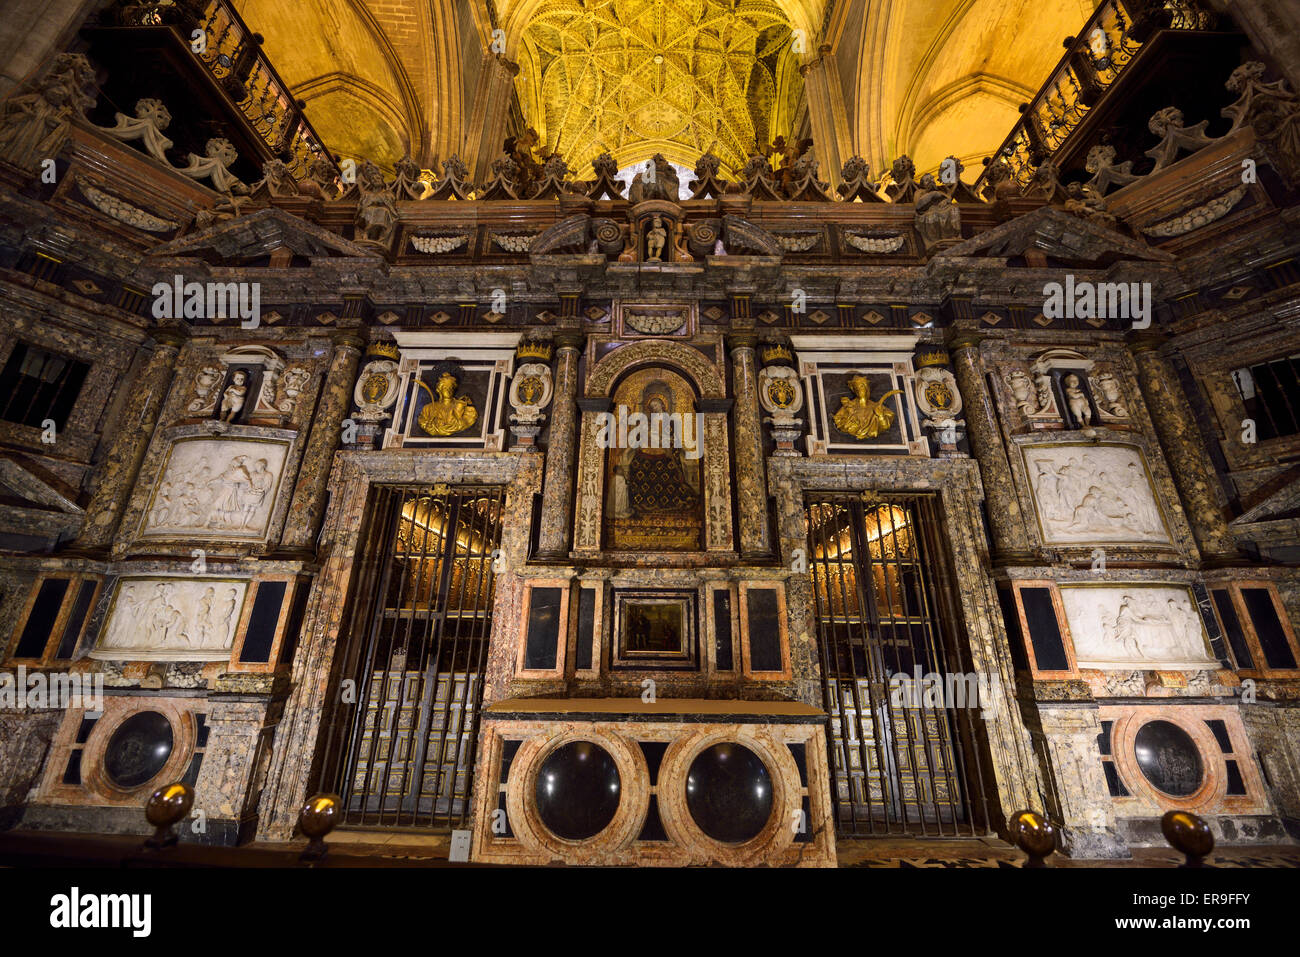 Ornate retrochoir behind the high altar in the Seville Cathedral Stock Photo